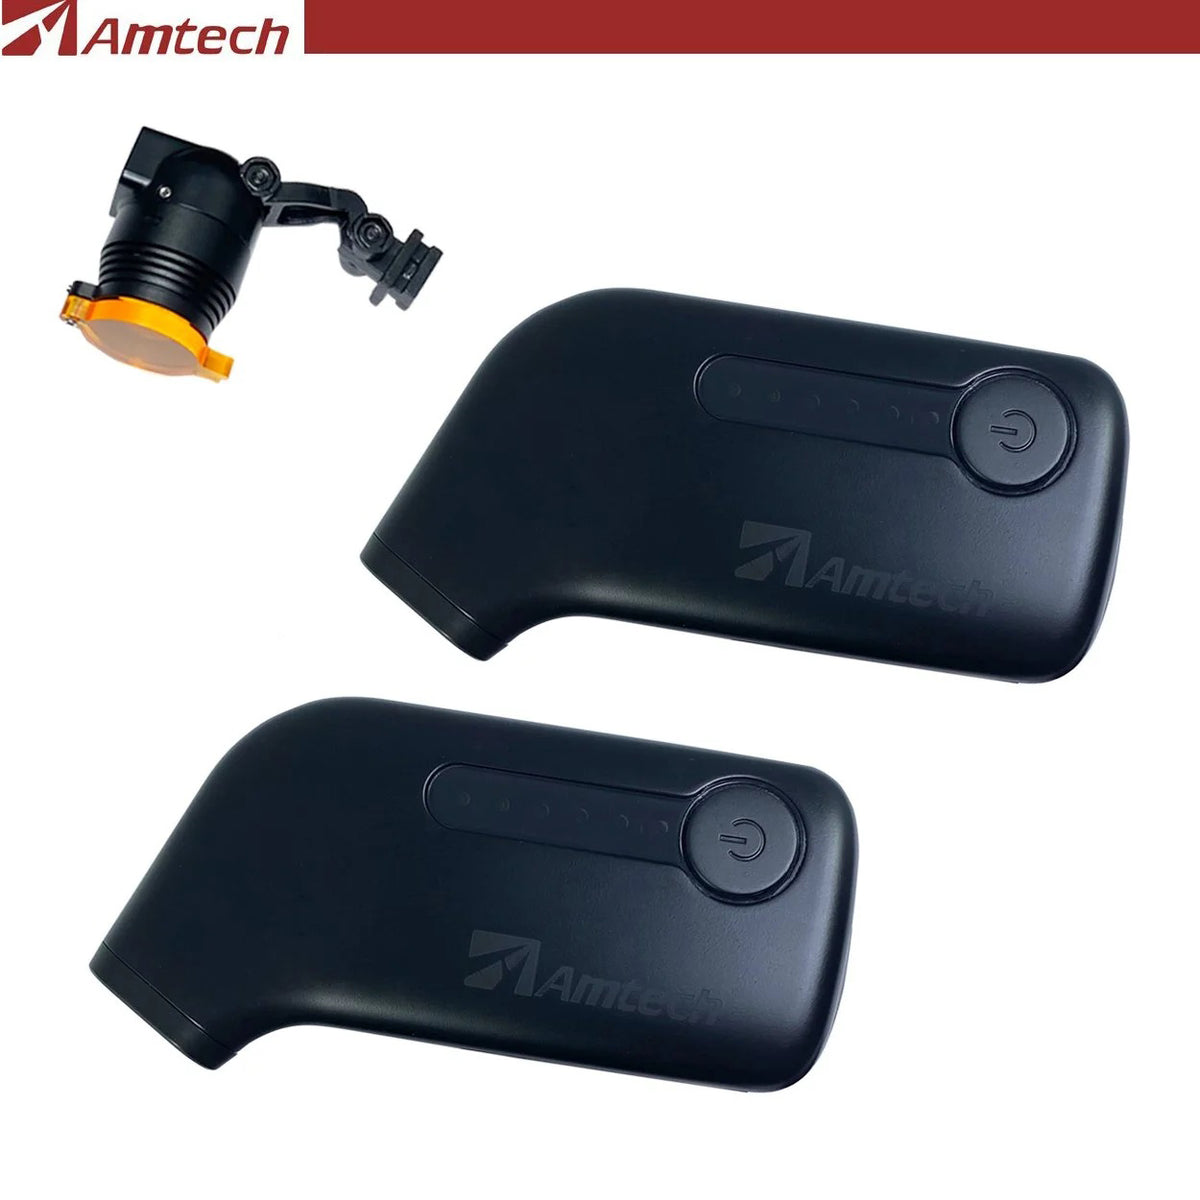 DentrealStore - Amtech LED Headlight With Cable